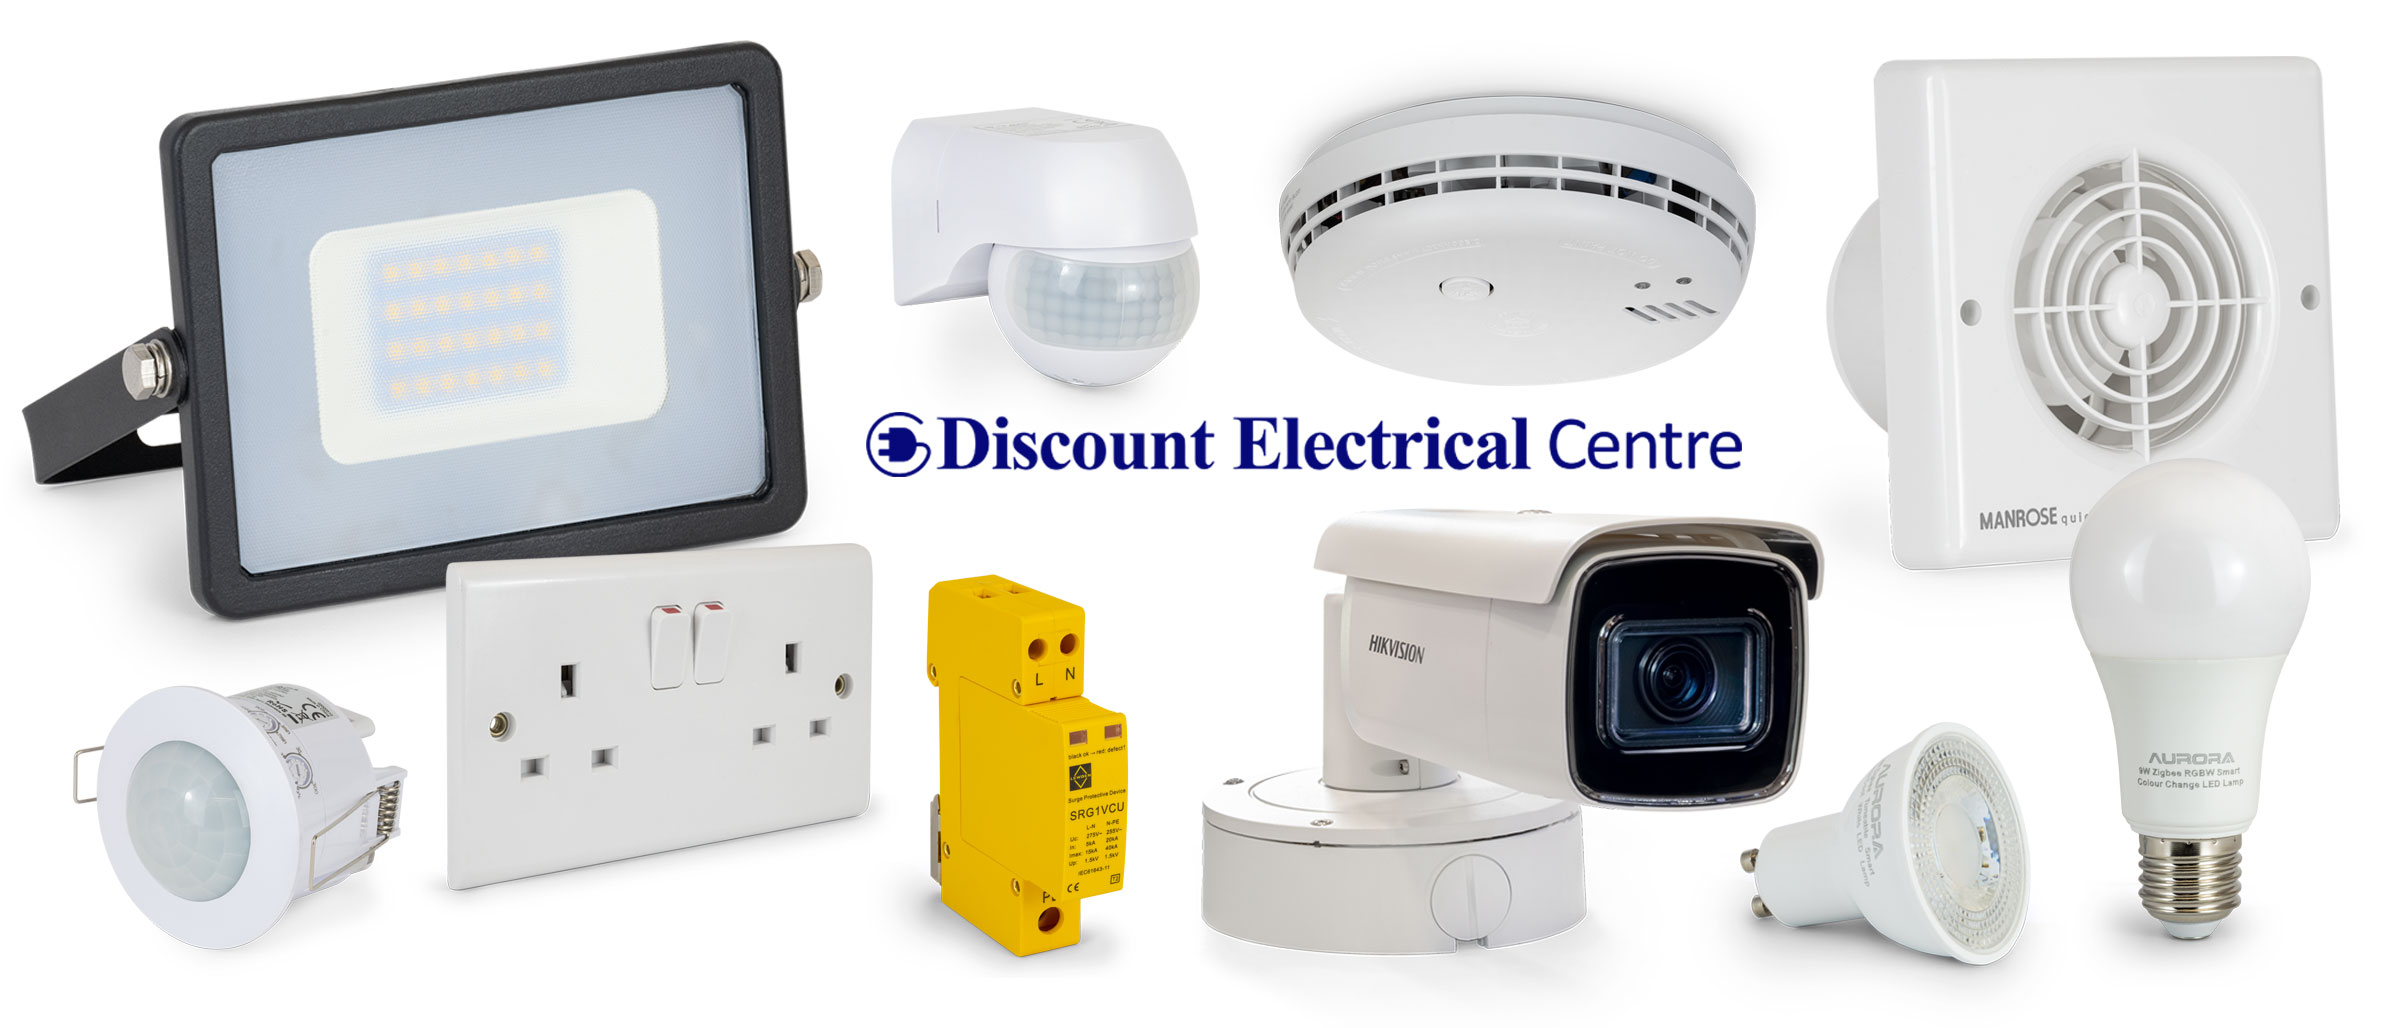 Discount-Electrical-Centre-Hikvision